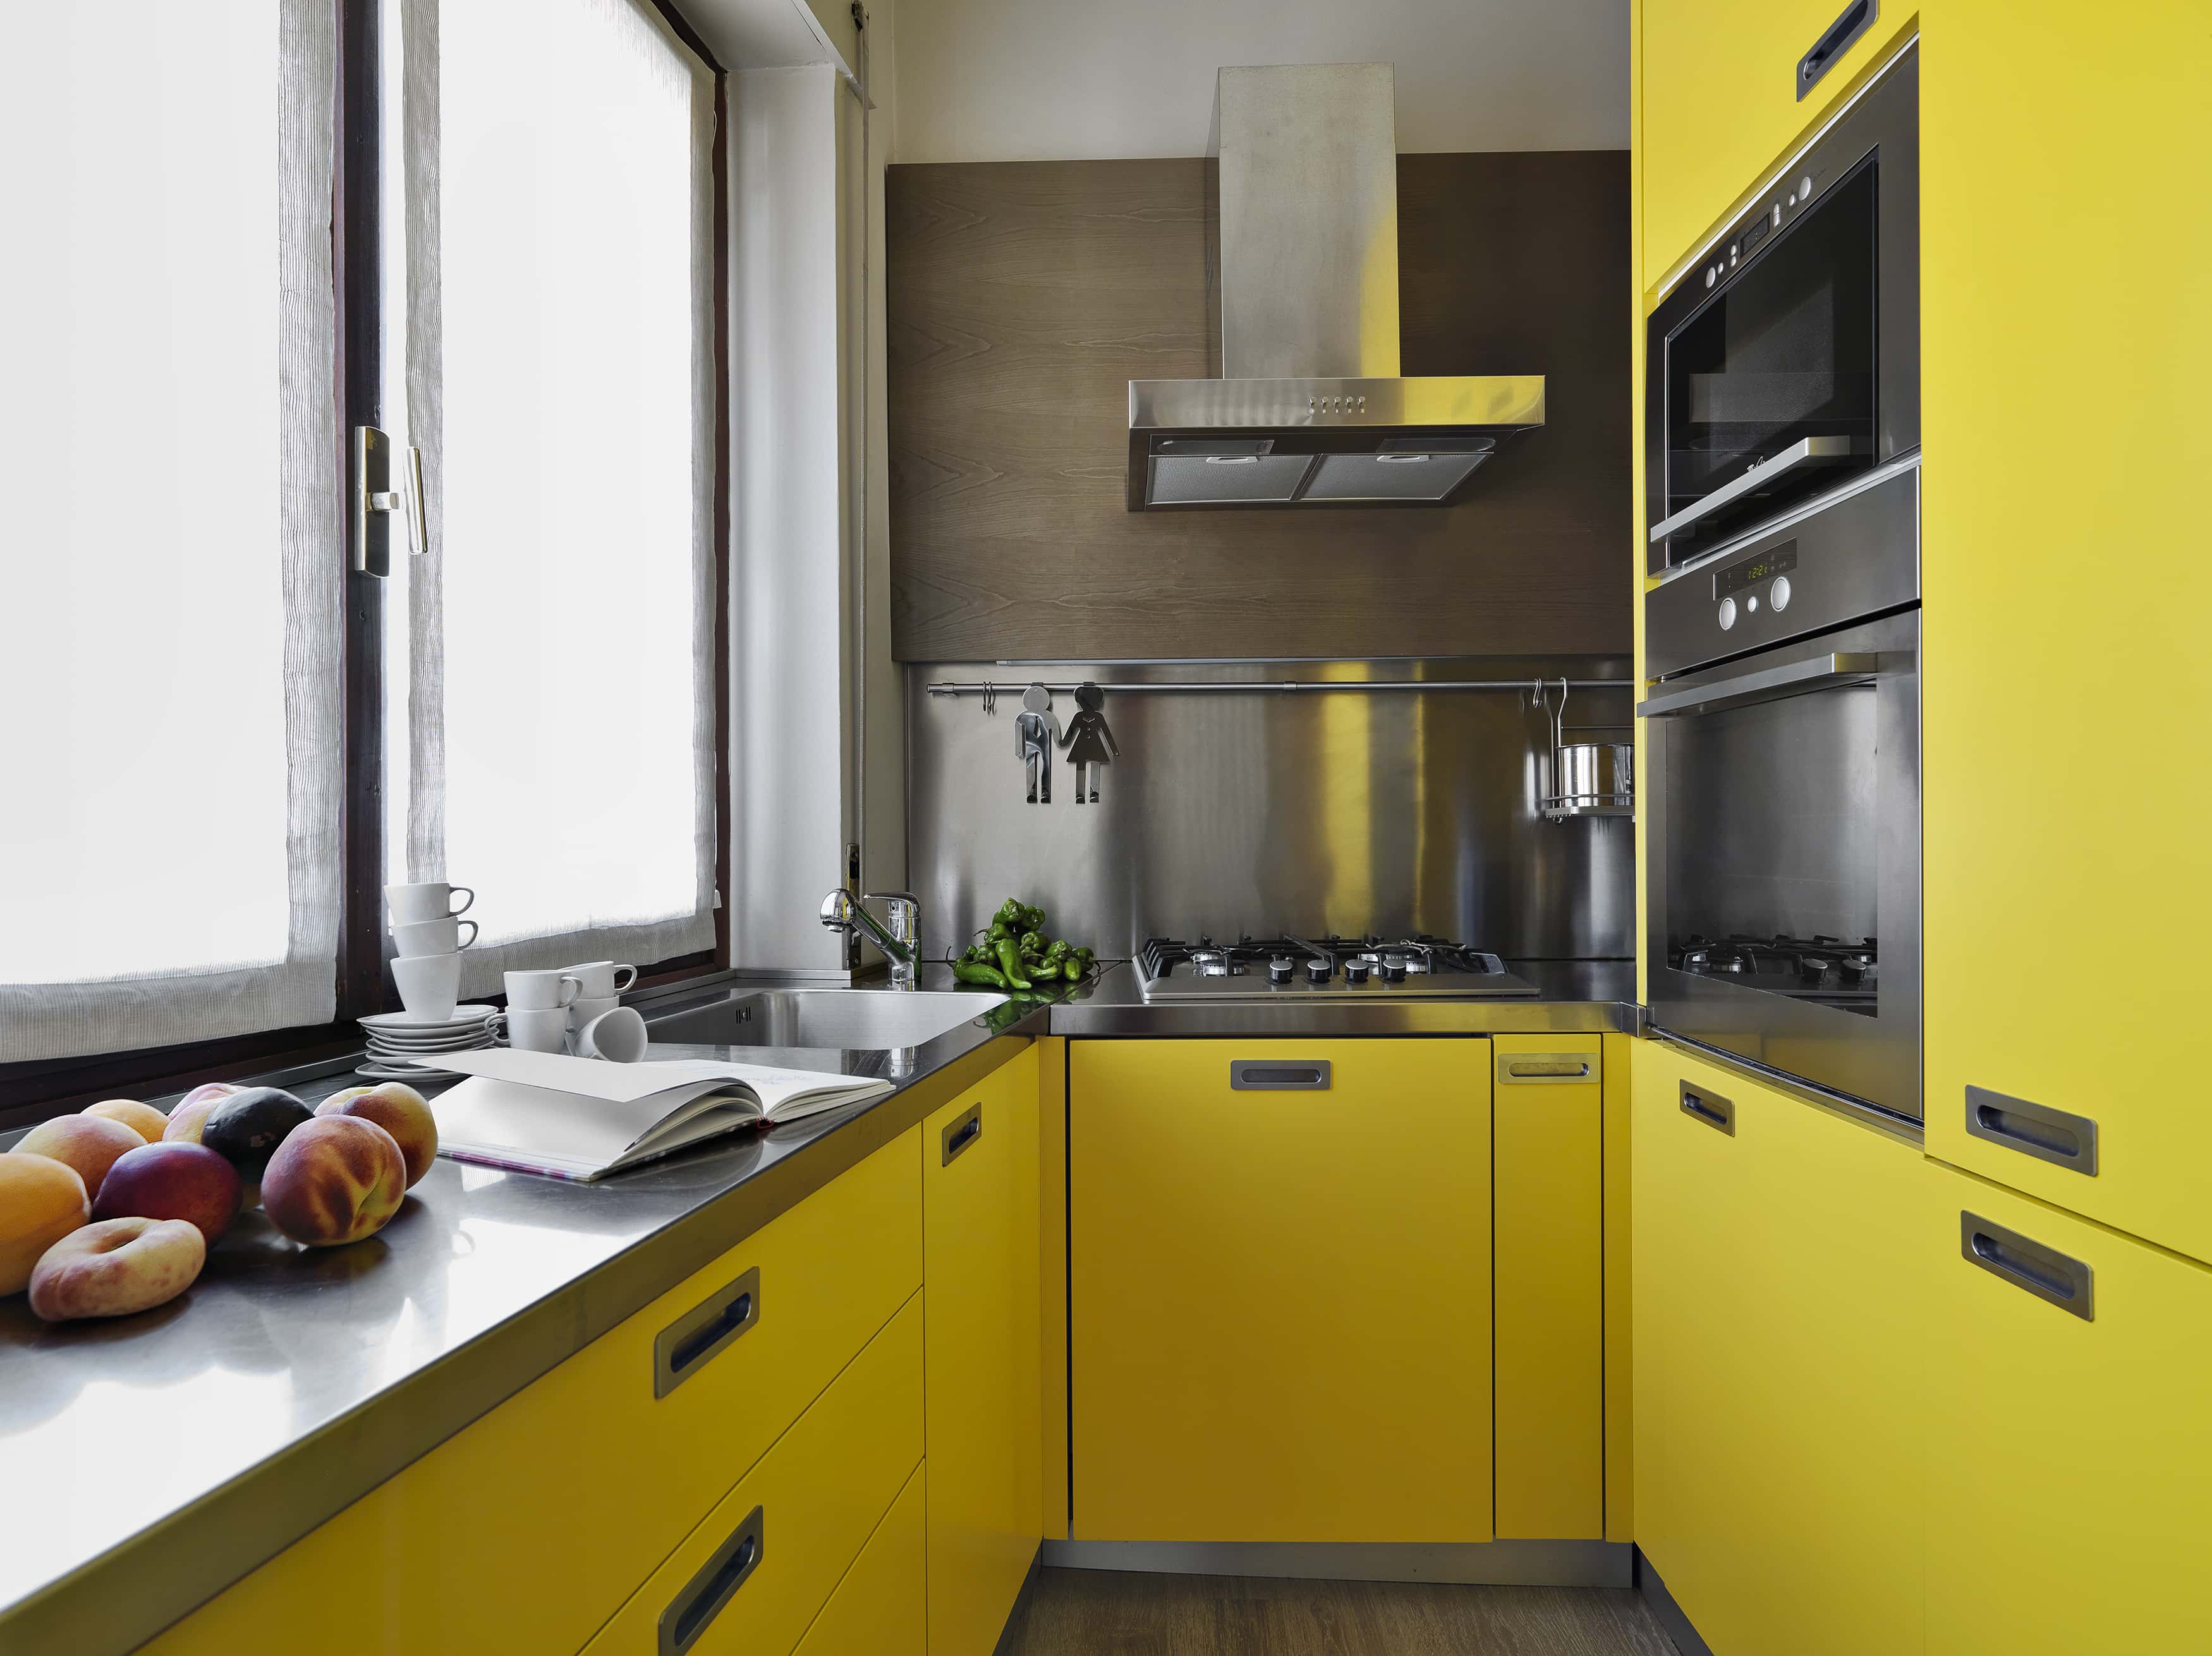 Modular Kitchen Design Tips for the first timer